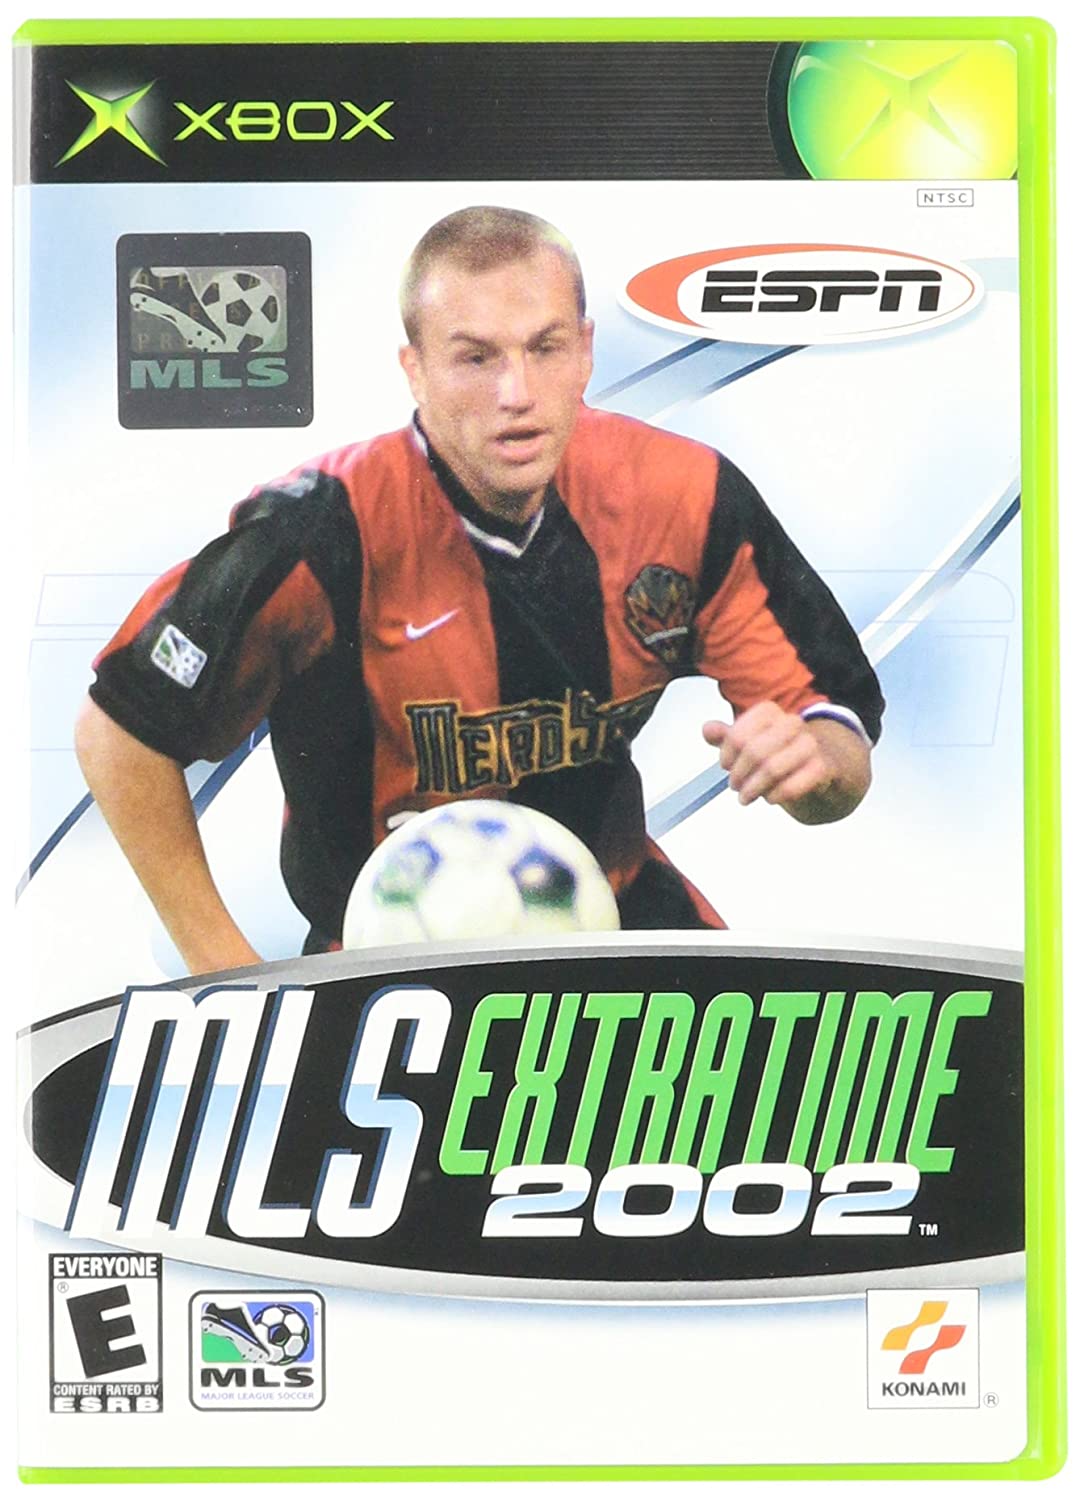 ESPN MLS ExtraTime 2002 player count stats